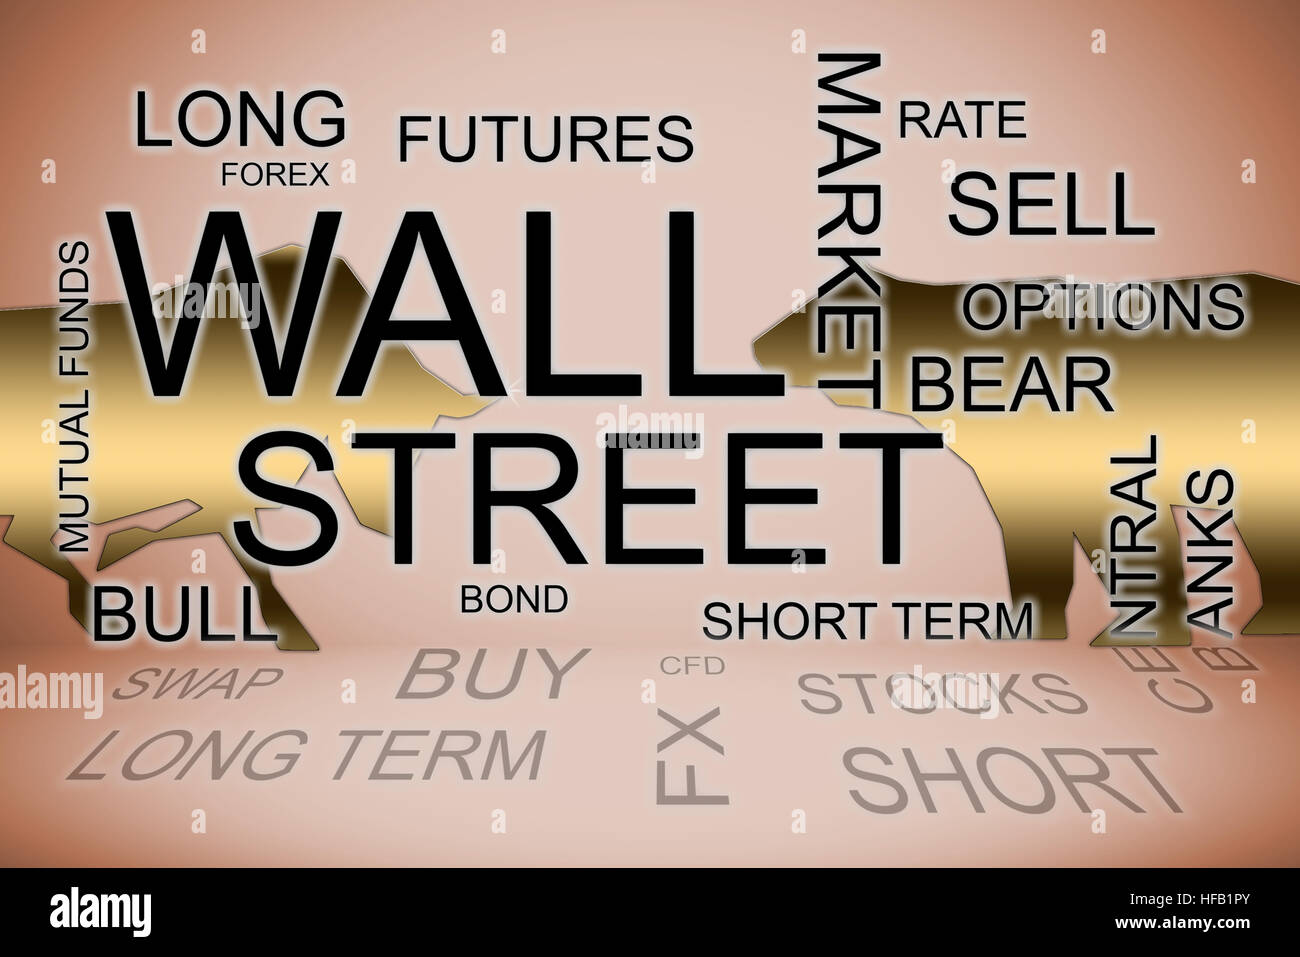 a wall street words in a financial concepts background Stock Photo